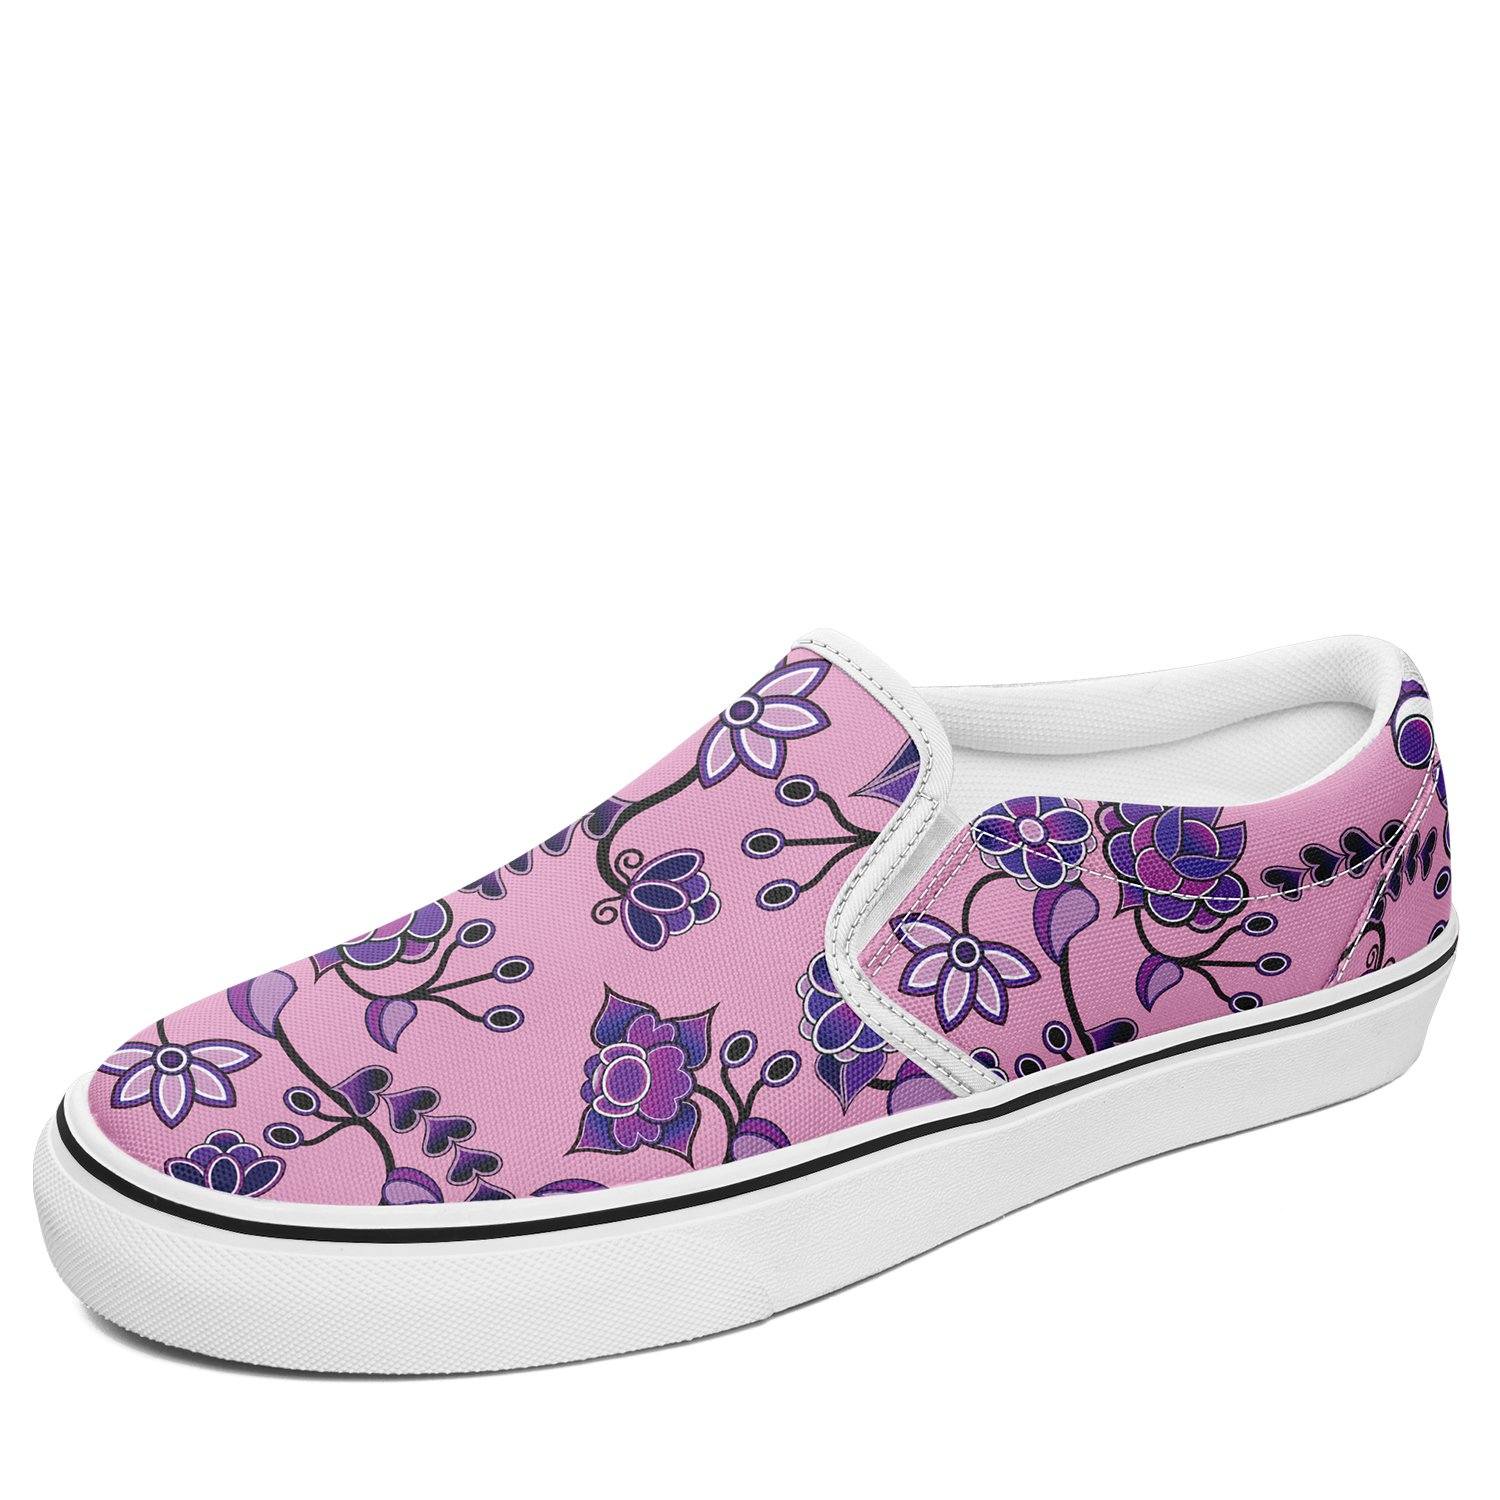 Purple Floral Amour Otoyimm Canvas Slip On Shoes otoyimm Herman US Youth 1 / EUR 32 White Sole 